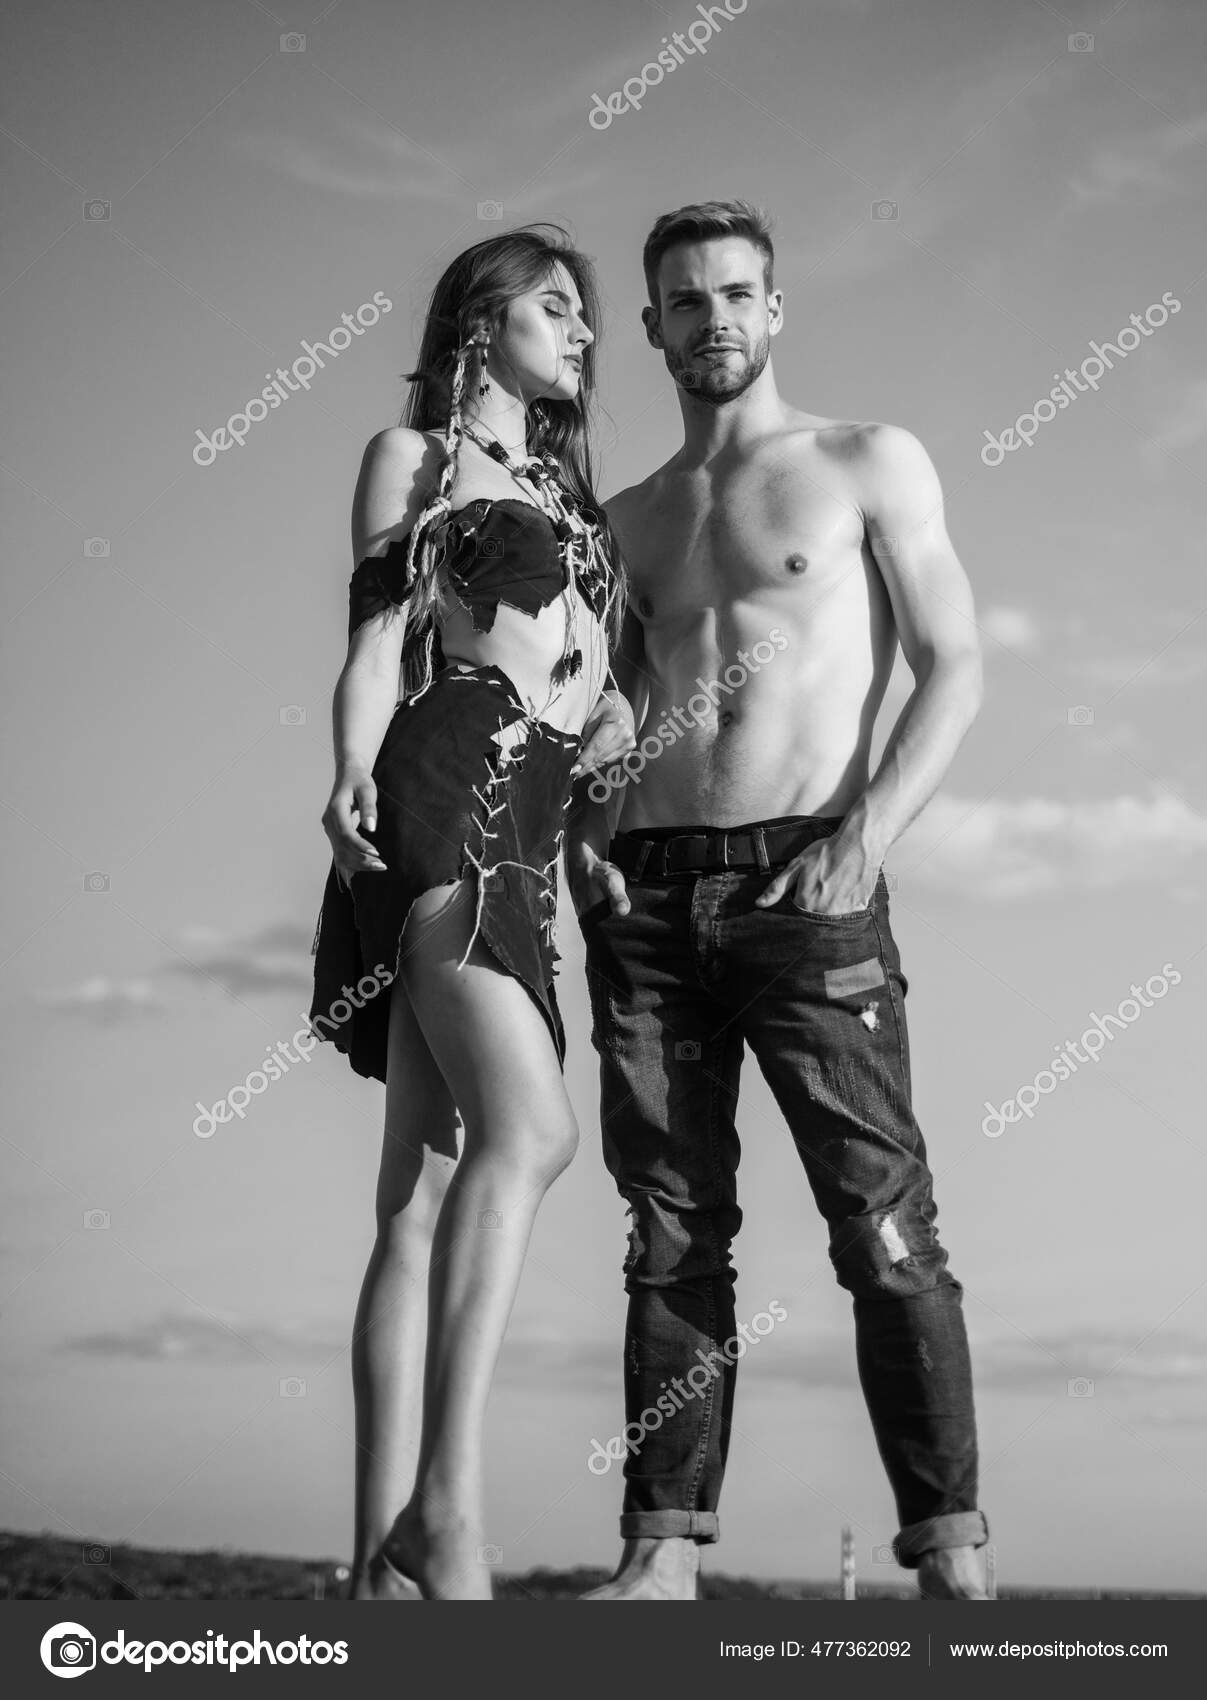 Romantic relationship concept. hot summer weather. macho man has muscular body. sensual couple in love. sexy girl wear suede leather